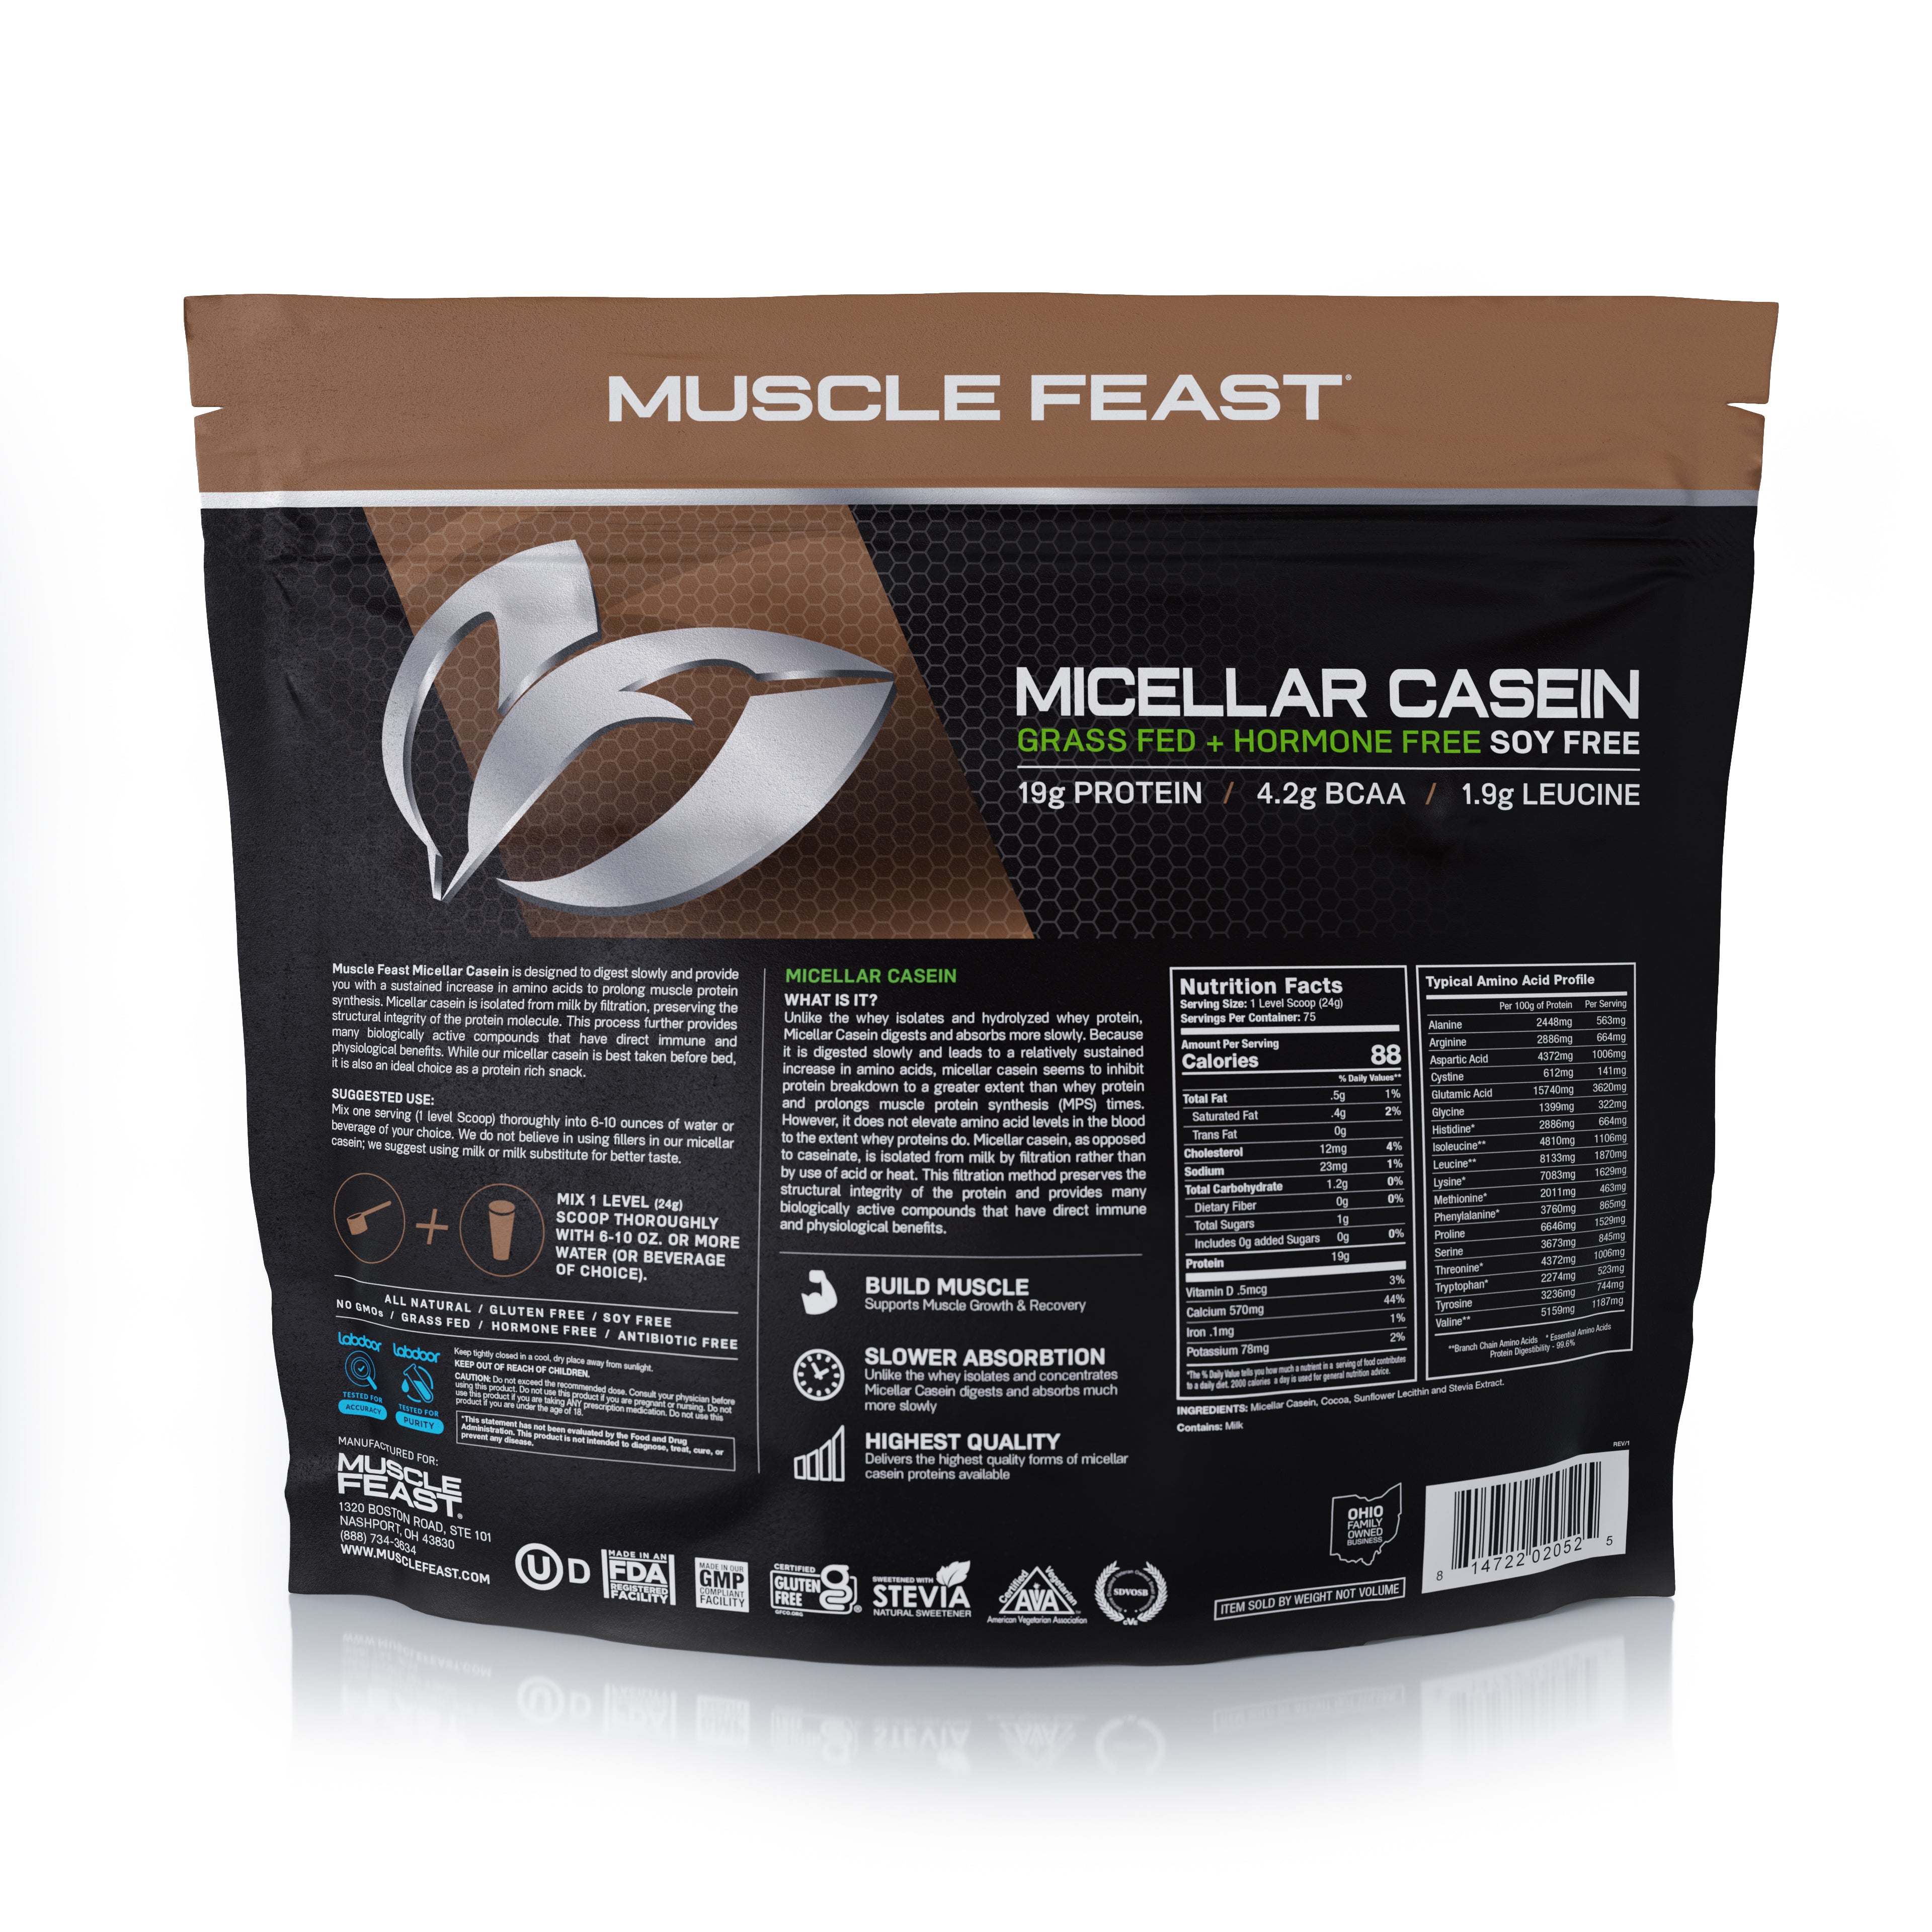 Micellar Casein Protein, All Natural Pasture Raised Hormone Free Soy Free